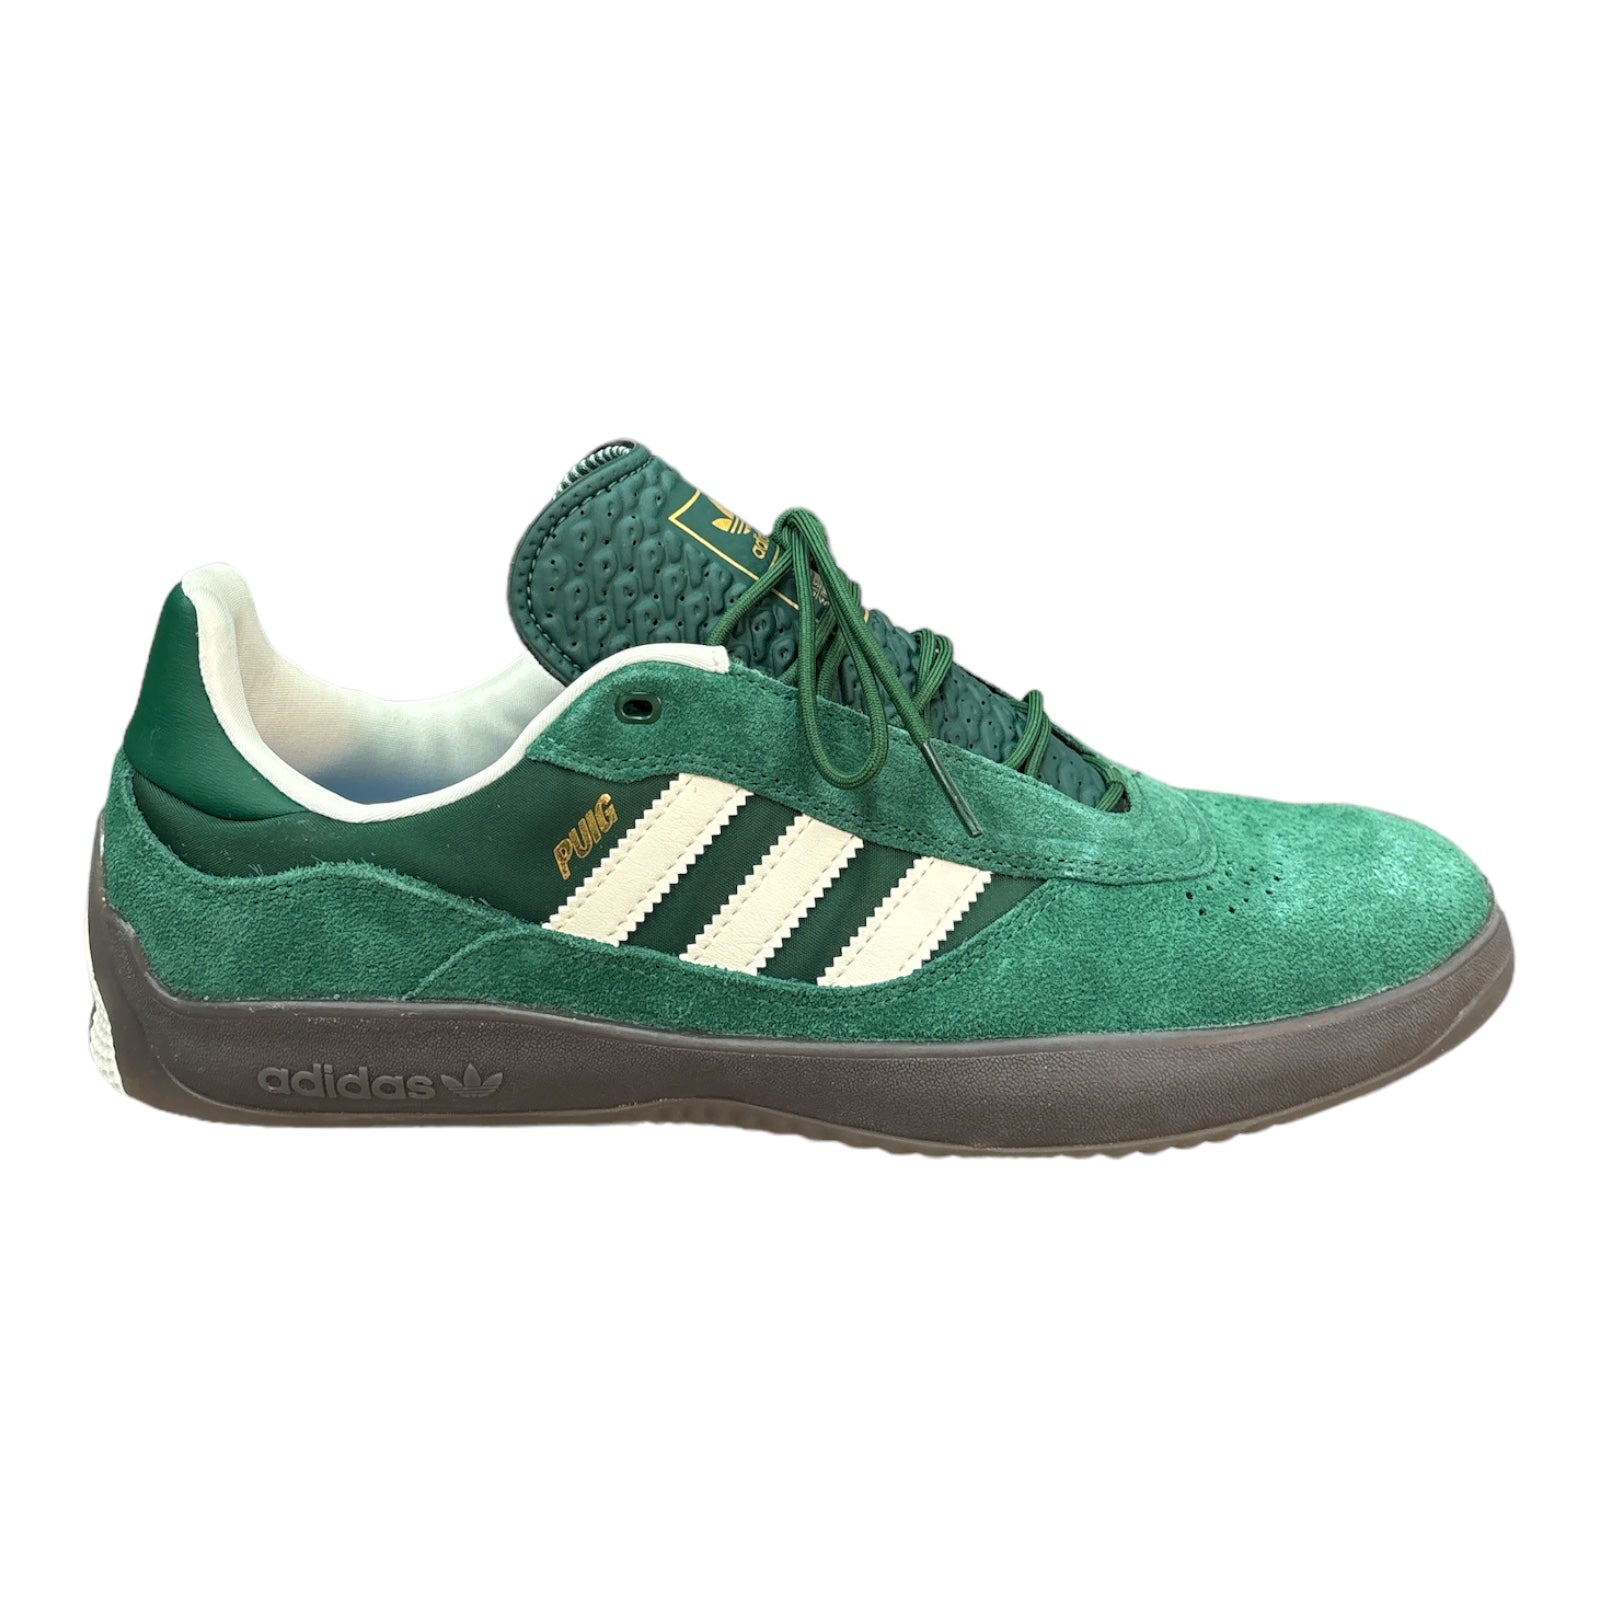 Adidas Puig in Forest Green Suede with Gum Outsole & Cream Colored Stripes. 